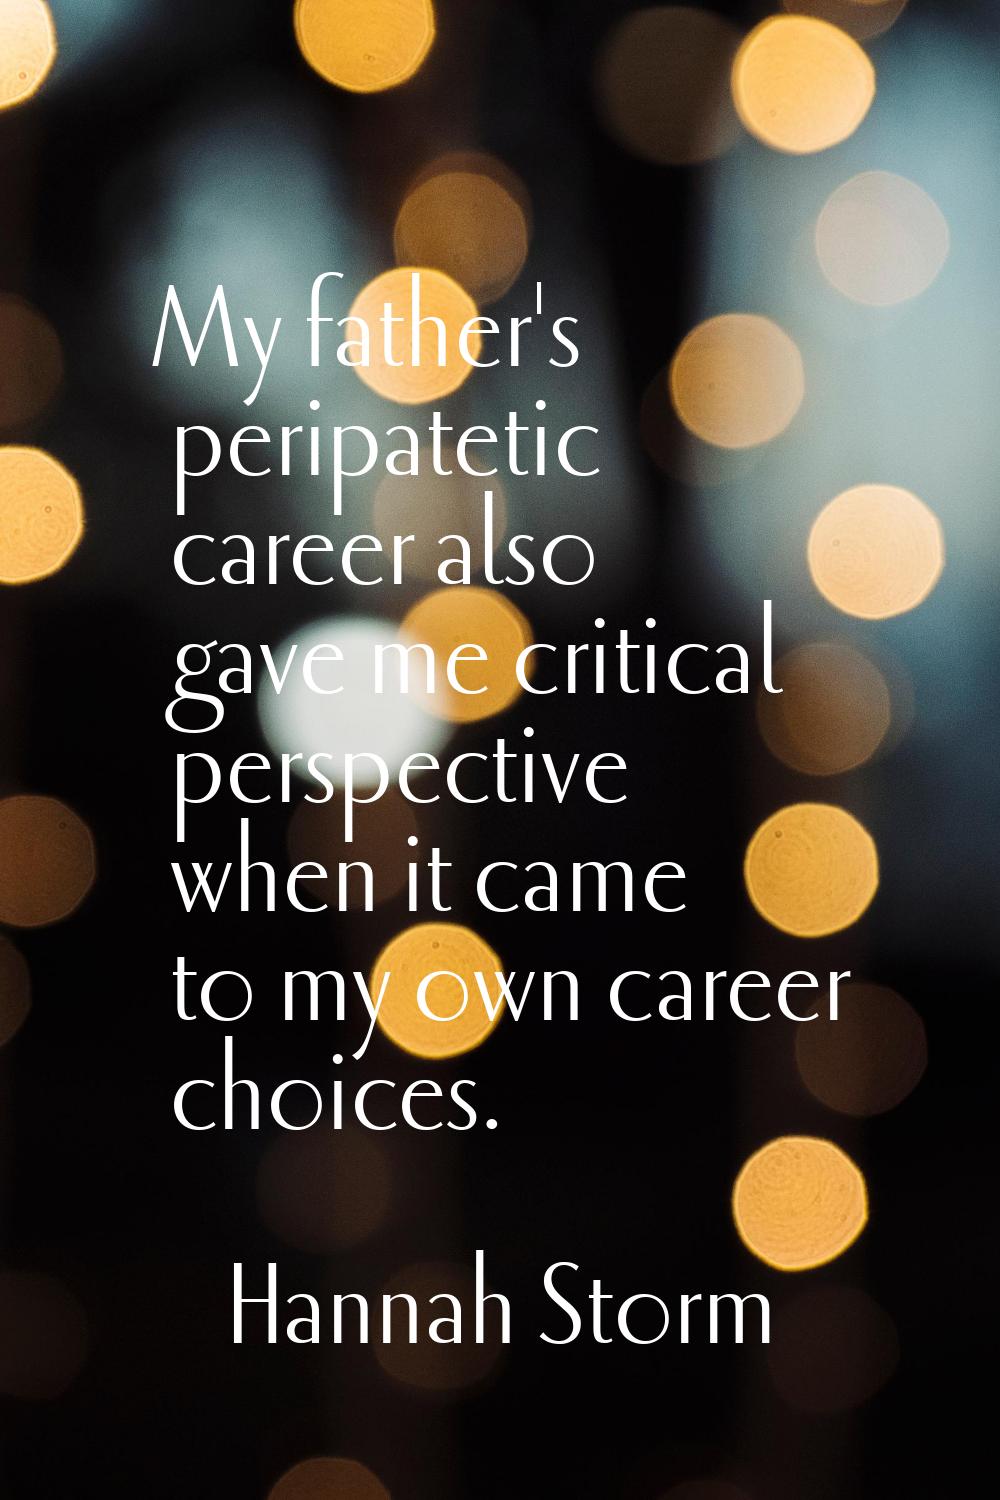 My father's peripatetic career also gave me critical perspective when it came to my own career choi